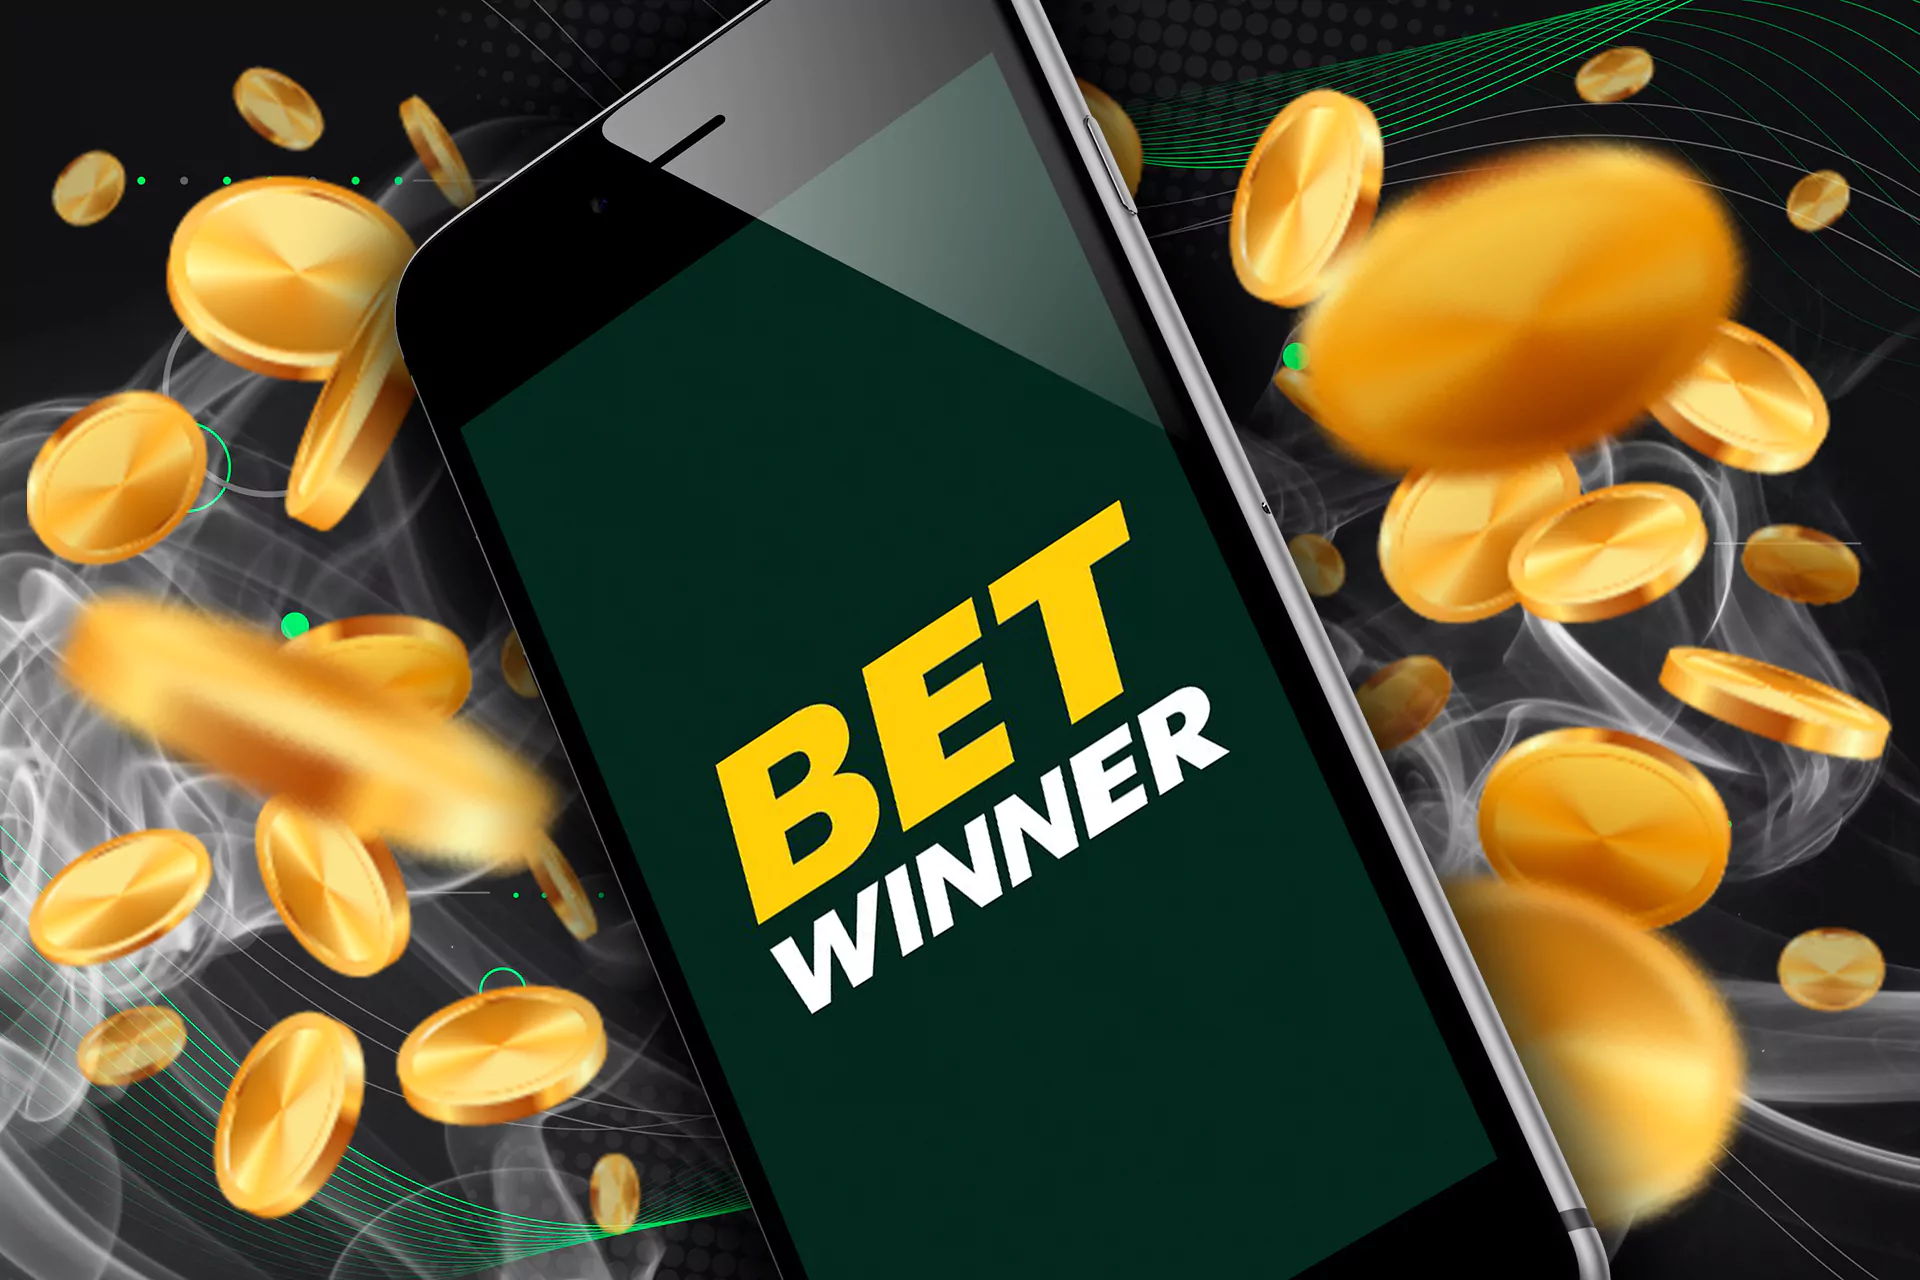 Betwinner is a great app to place bets and play casino games from India.